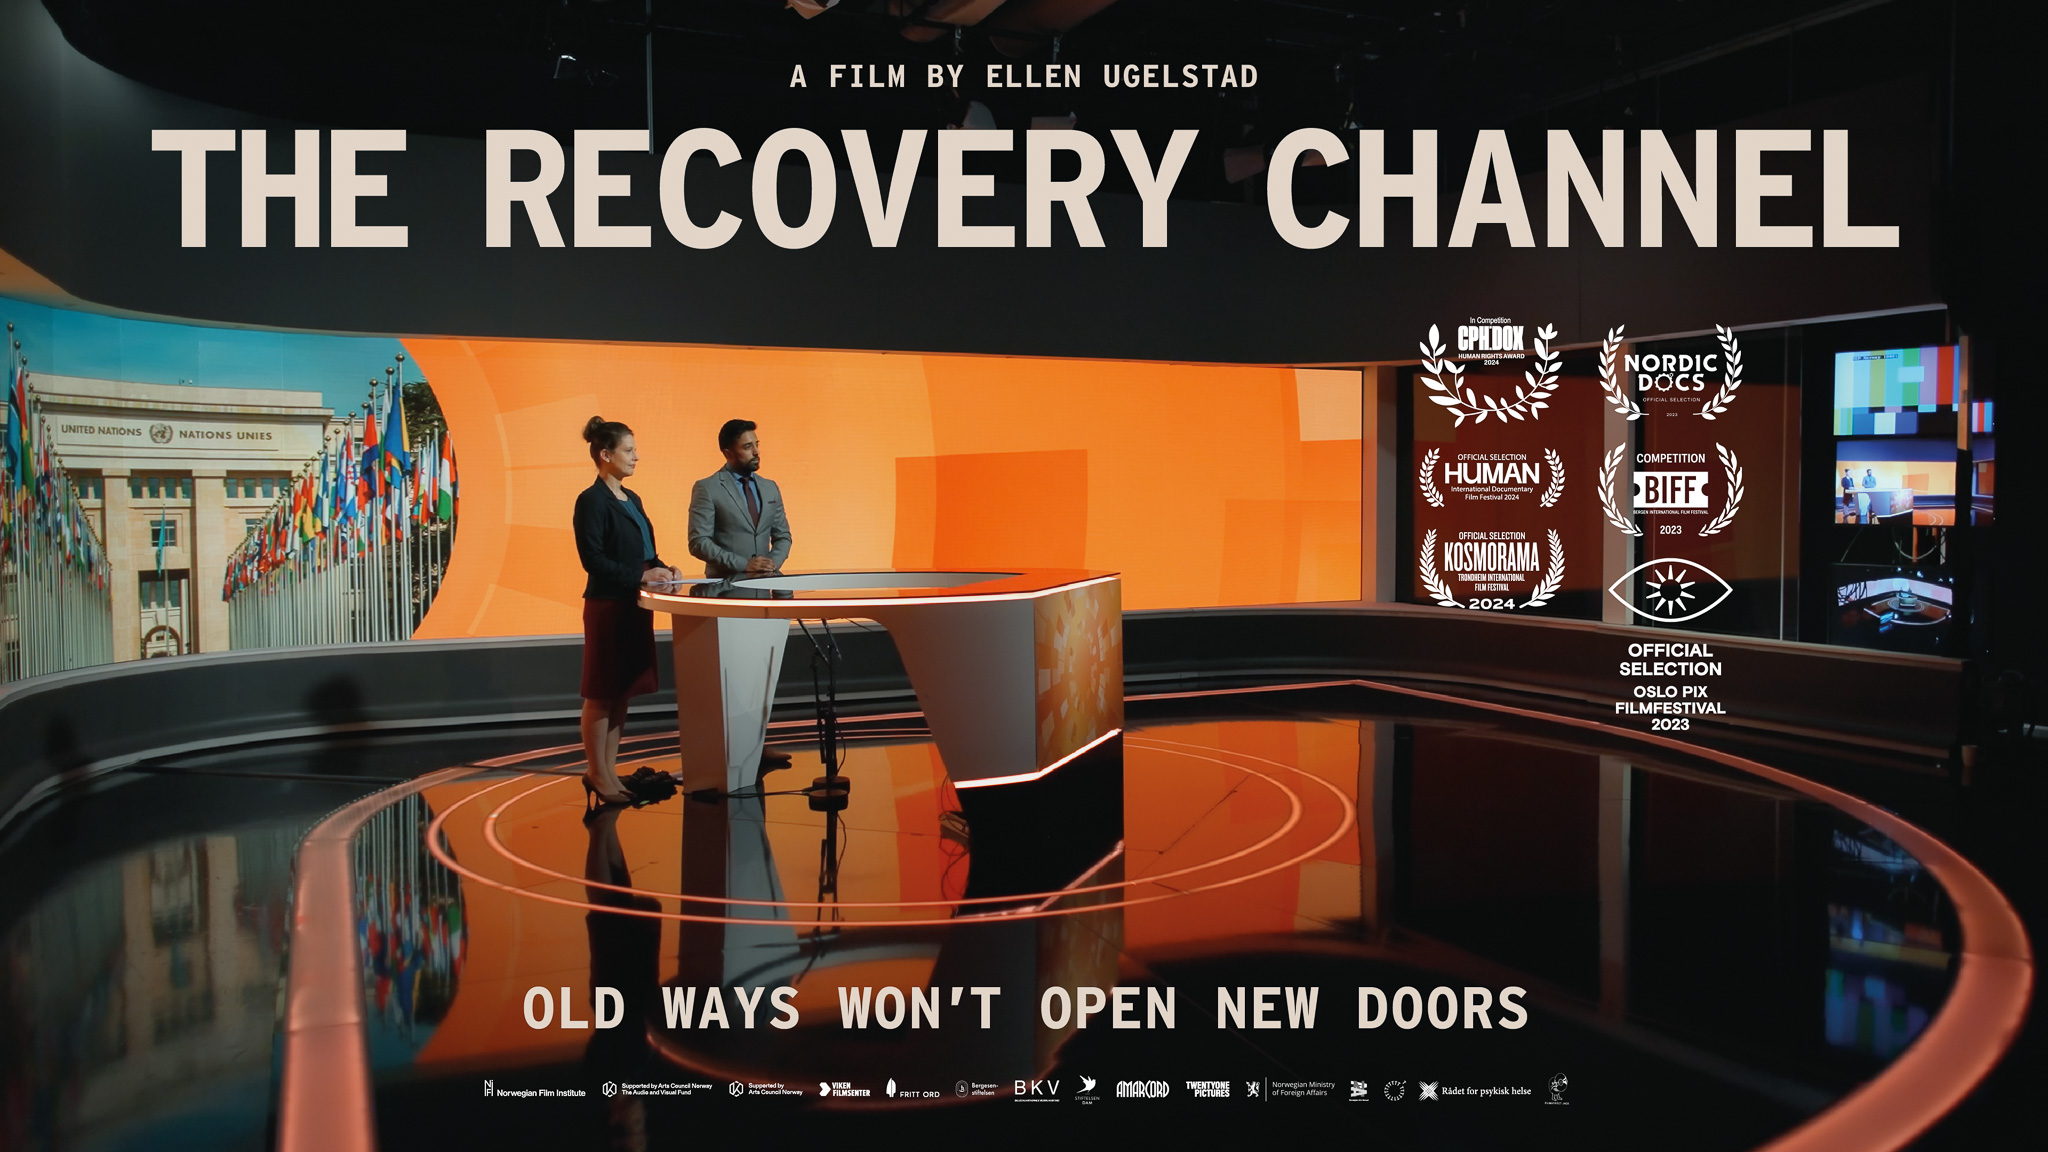 Filmvisning i Trondheim 16. april – THE RECOVERY CHANNEL